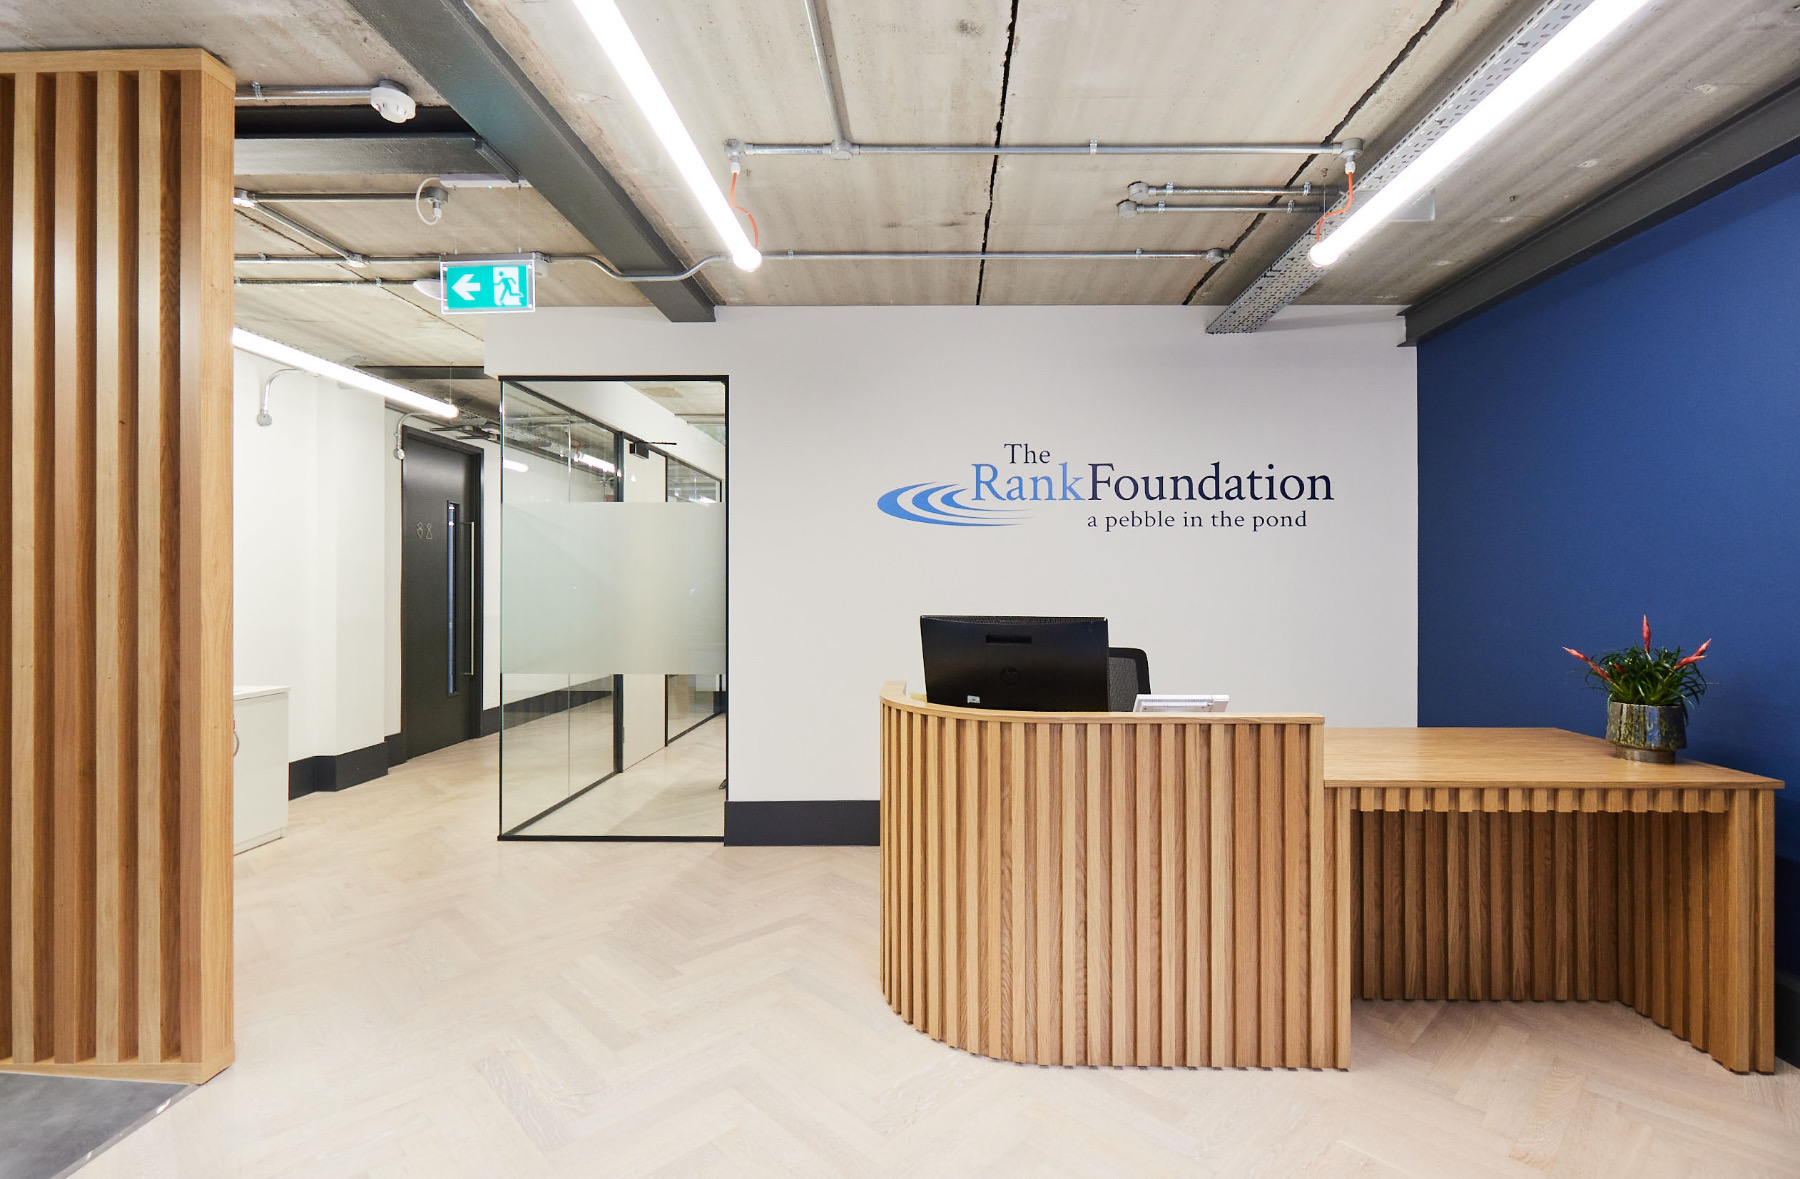 A Tour of The Rank Foundation’s New London Office